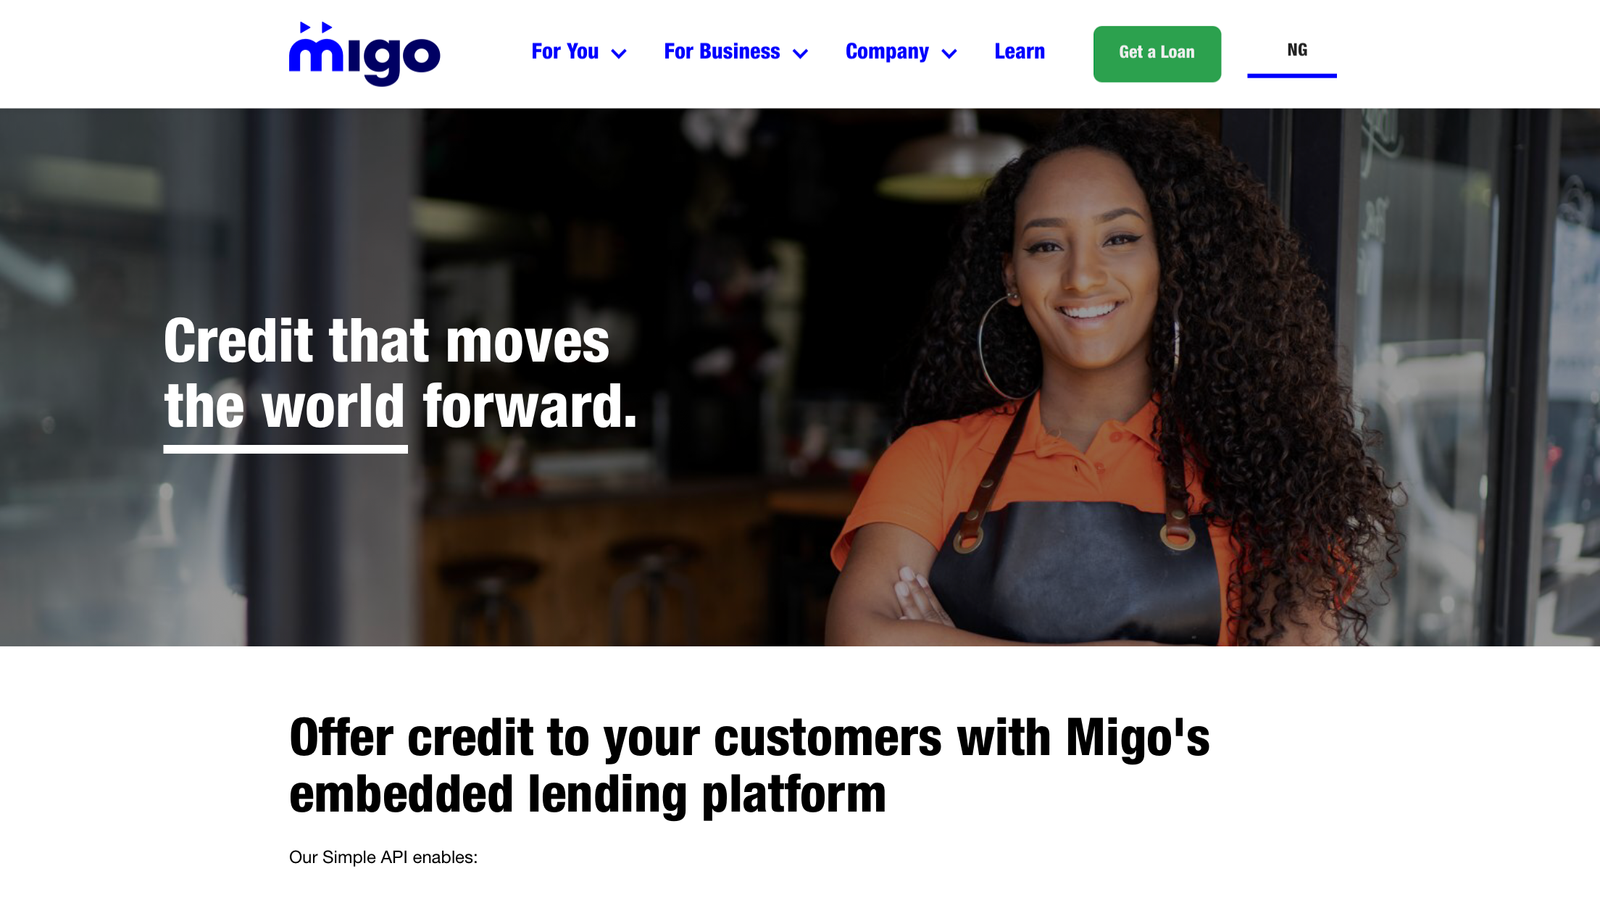 Migo Customer Care Whatsapp number, Phone Number, Email Address and Office Address